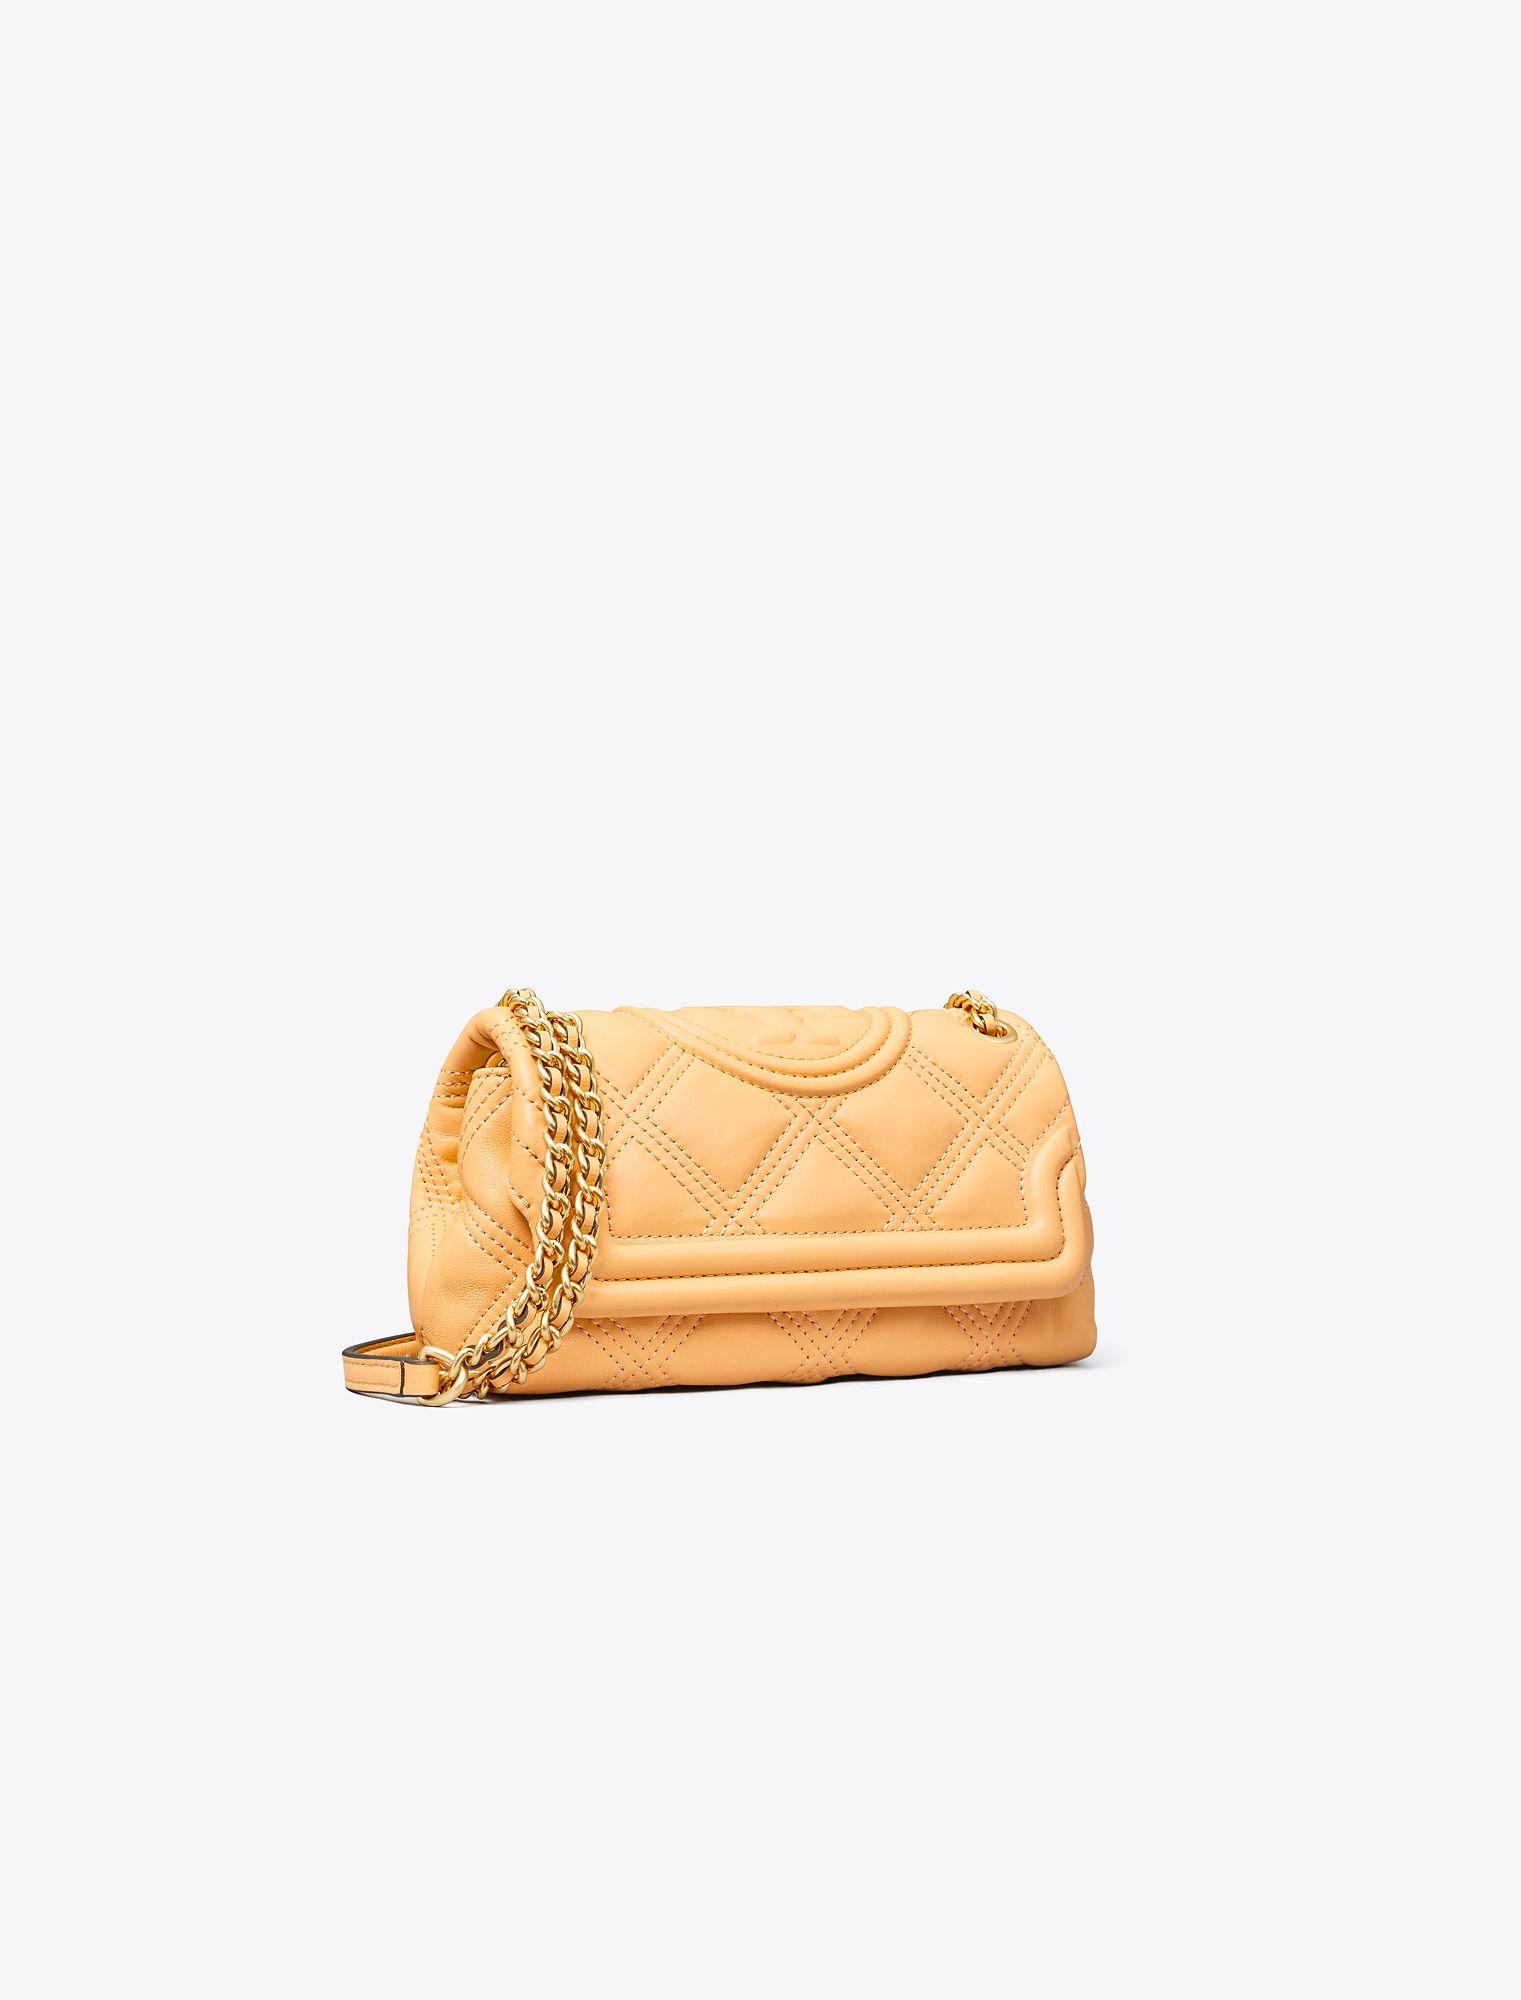 Tory Burch Small Fleming Soft Convertible Shoulder Bag in Natural